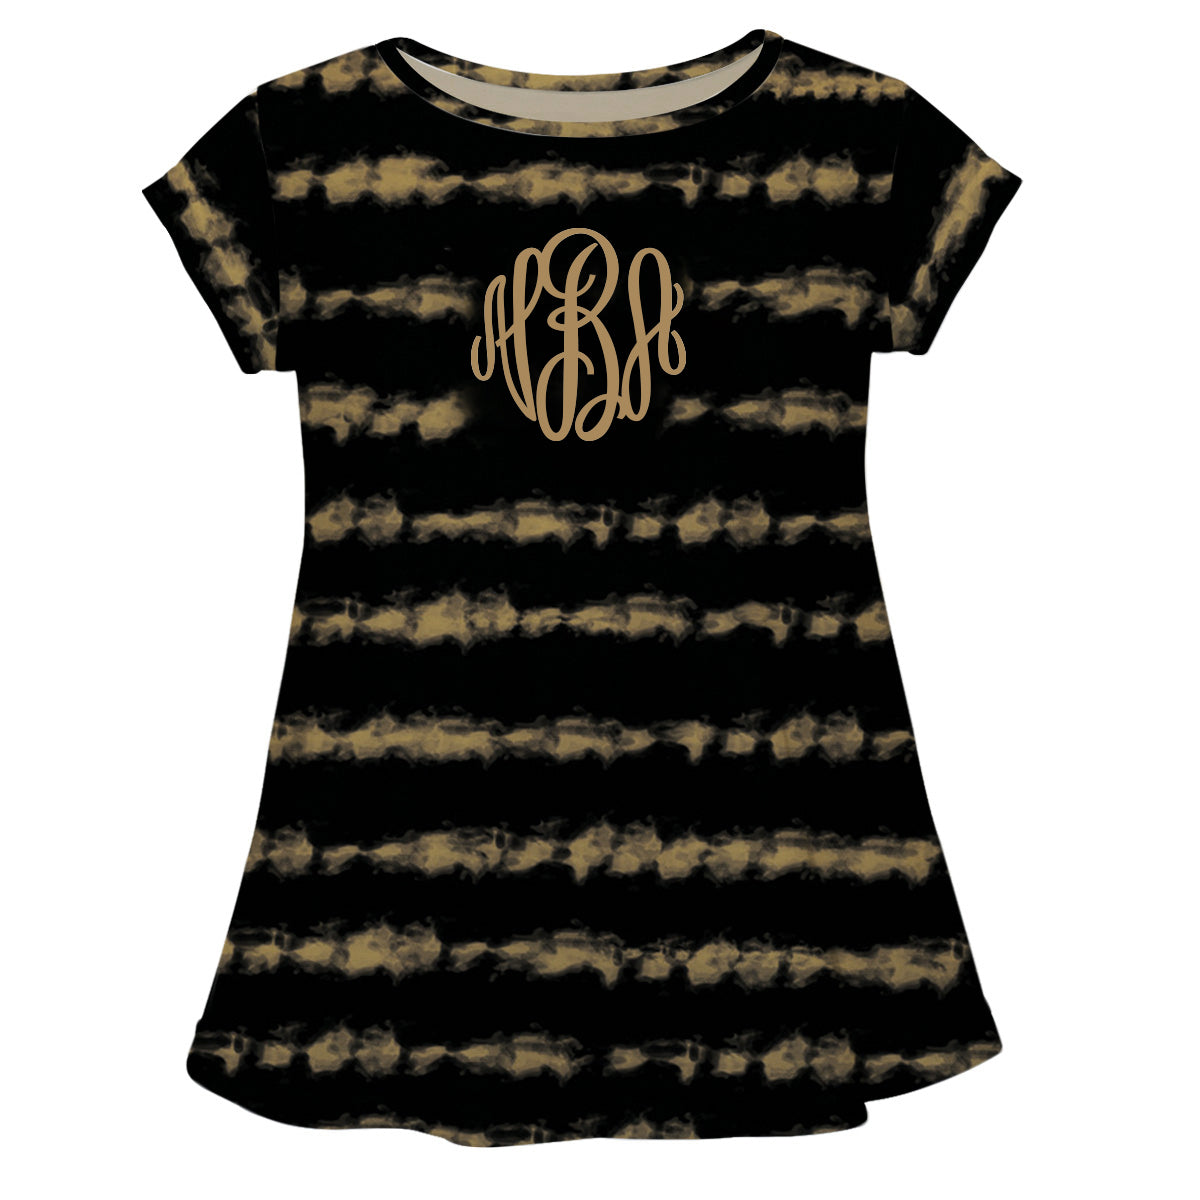 Girls black and gold tie dye blouse with monogram - Wimziy&Co.